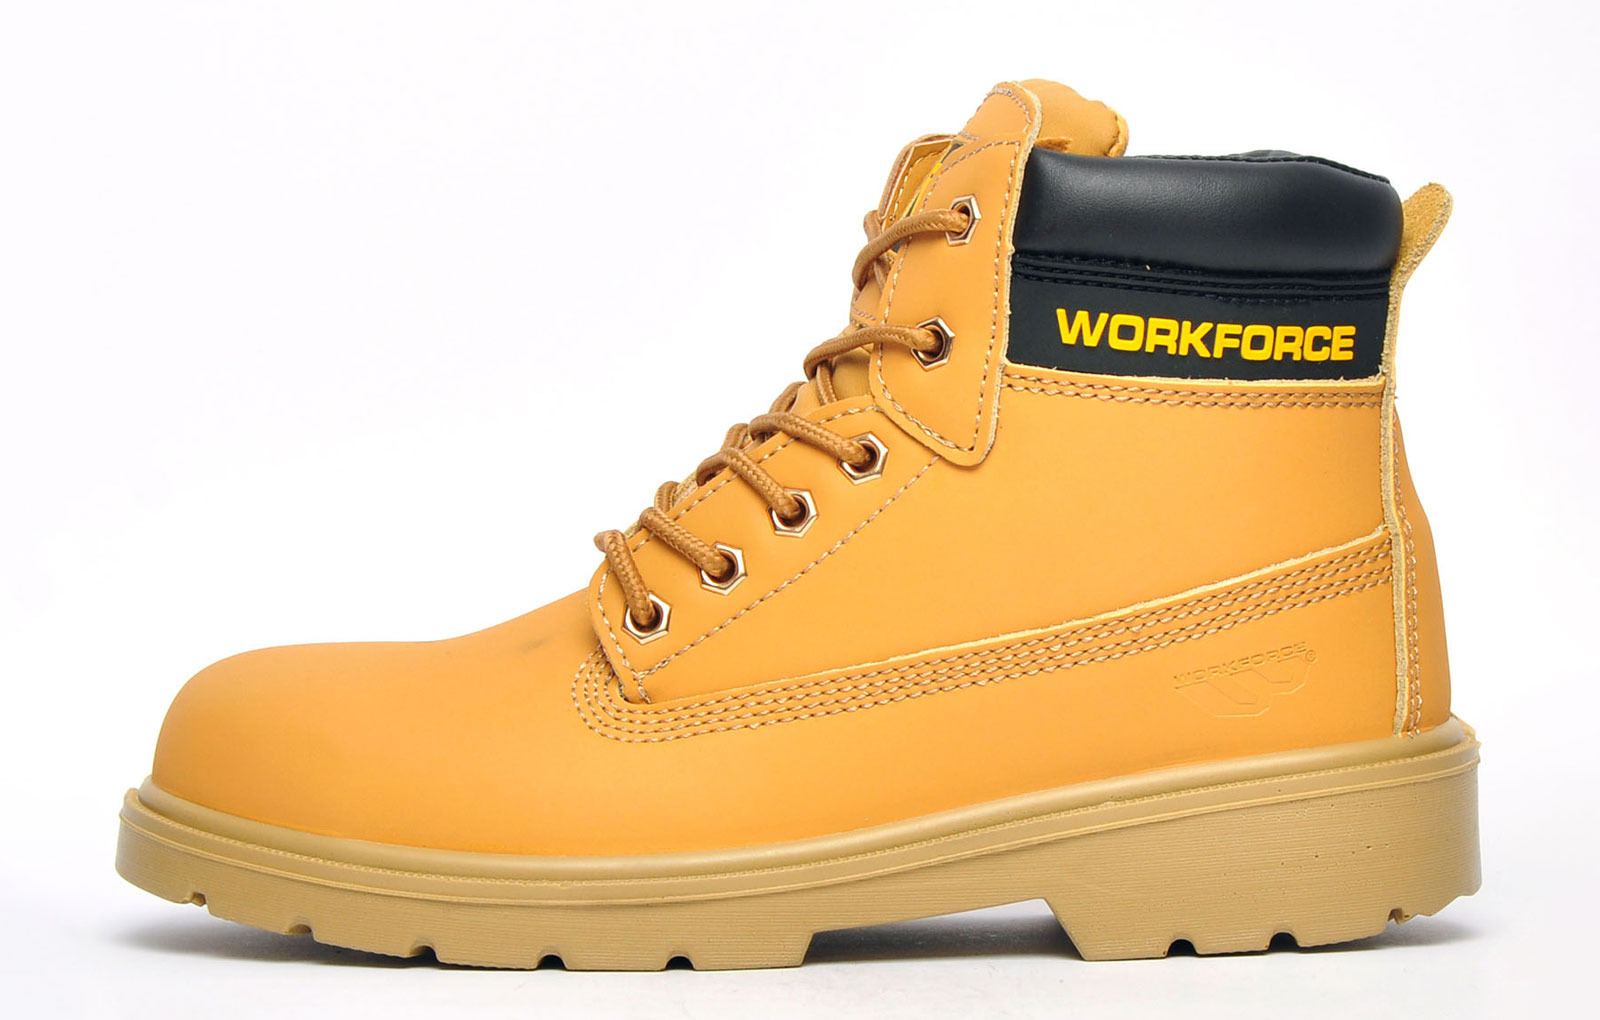 Workforce Mens Steel Toe Cap Safety Work Leather Boots Trainers Water Resistant 